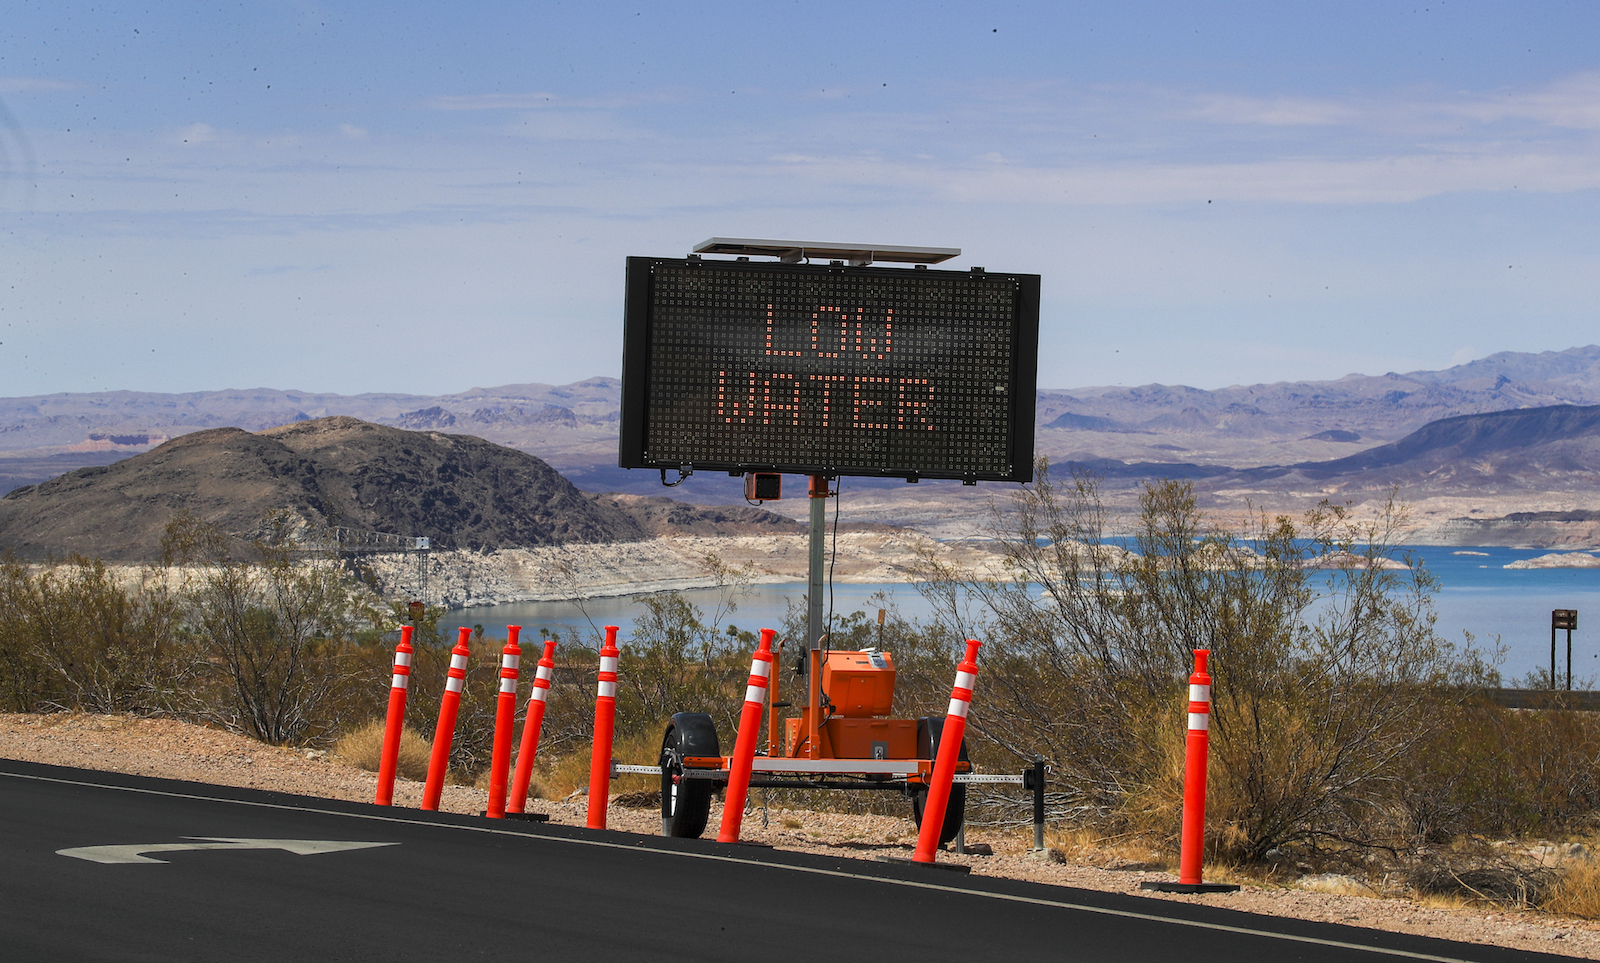 a large light-up sign near the side of a highway says low levels. The sign is surrounded by orange cones and water is visible in the background